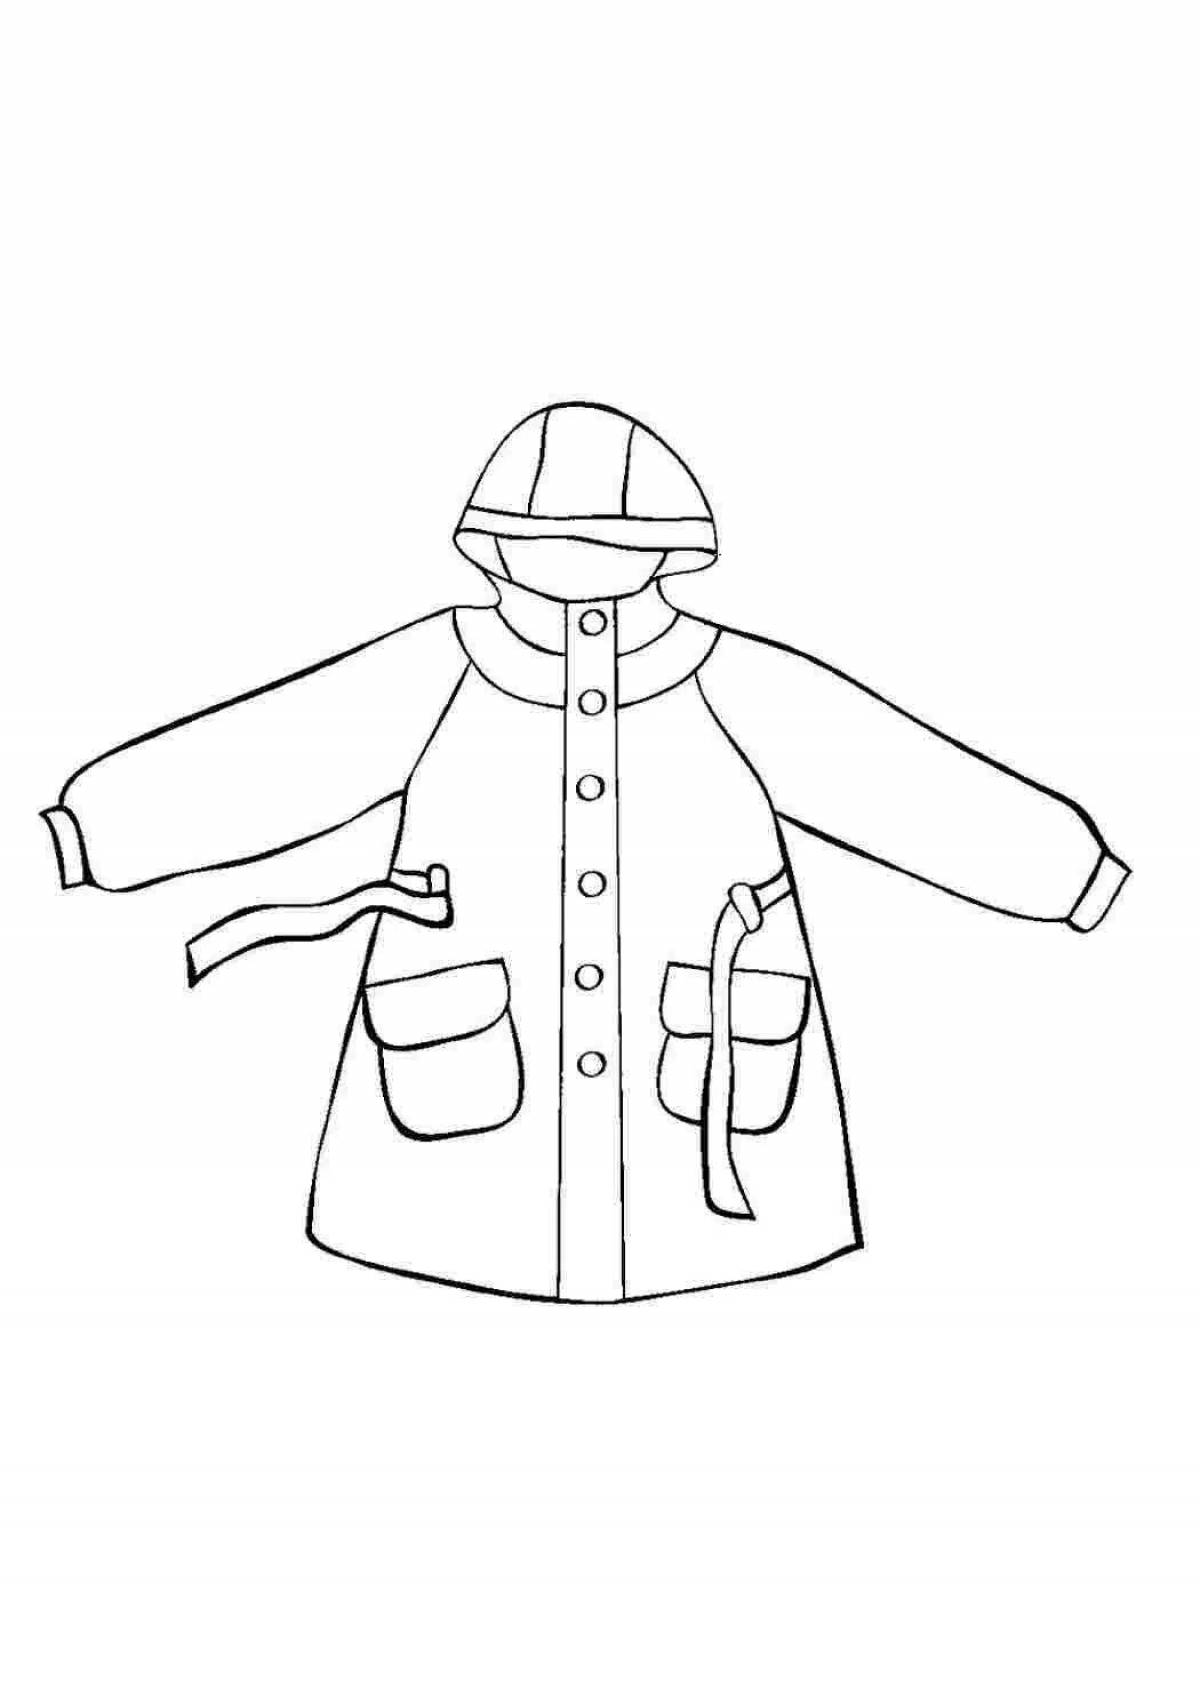 Adorable coat coloring for kids